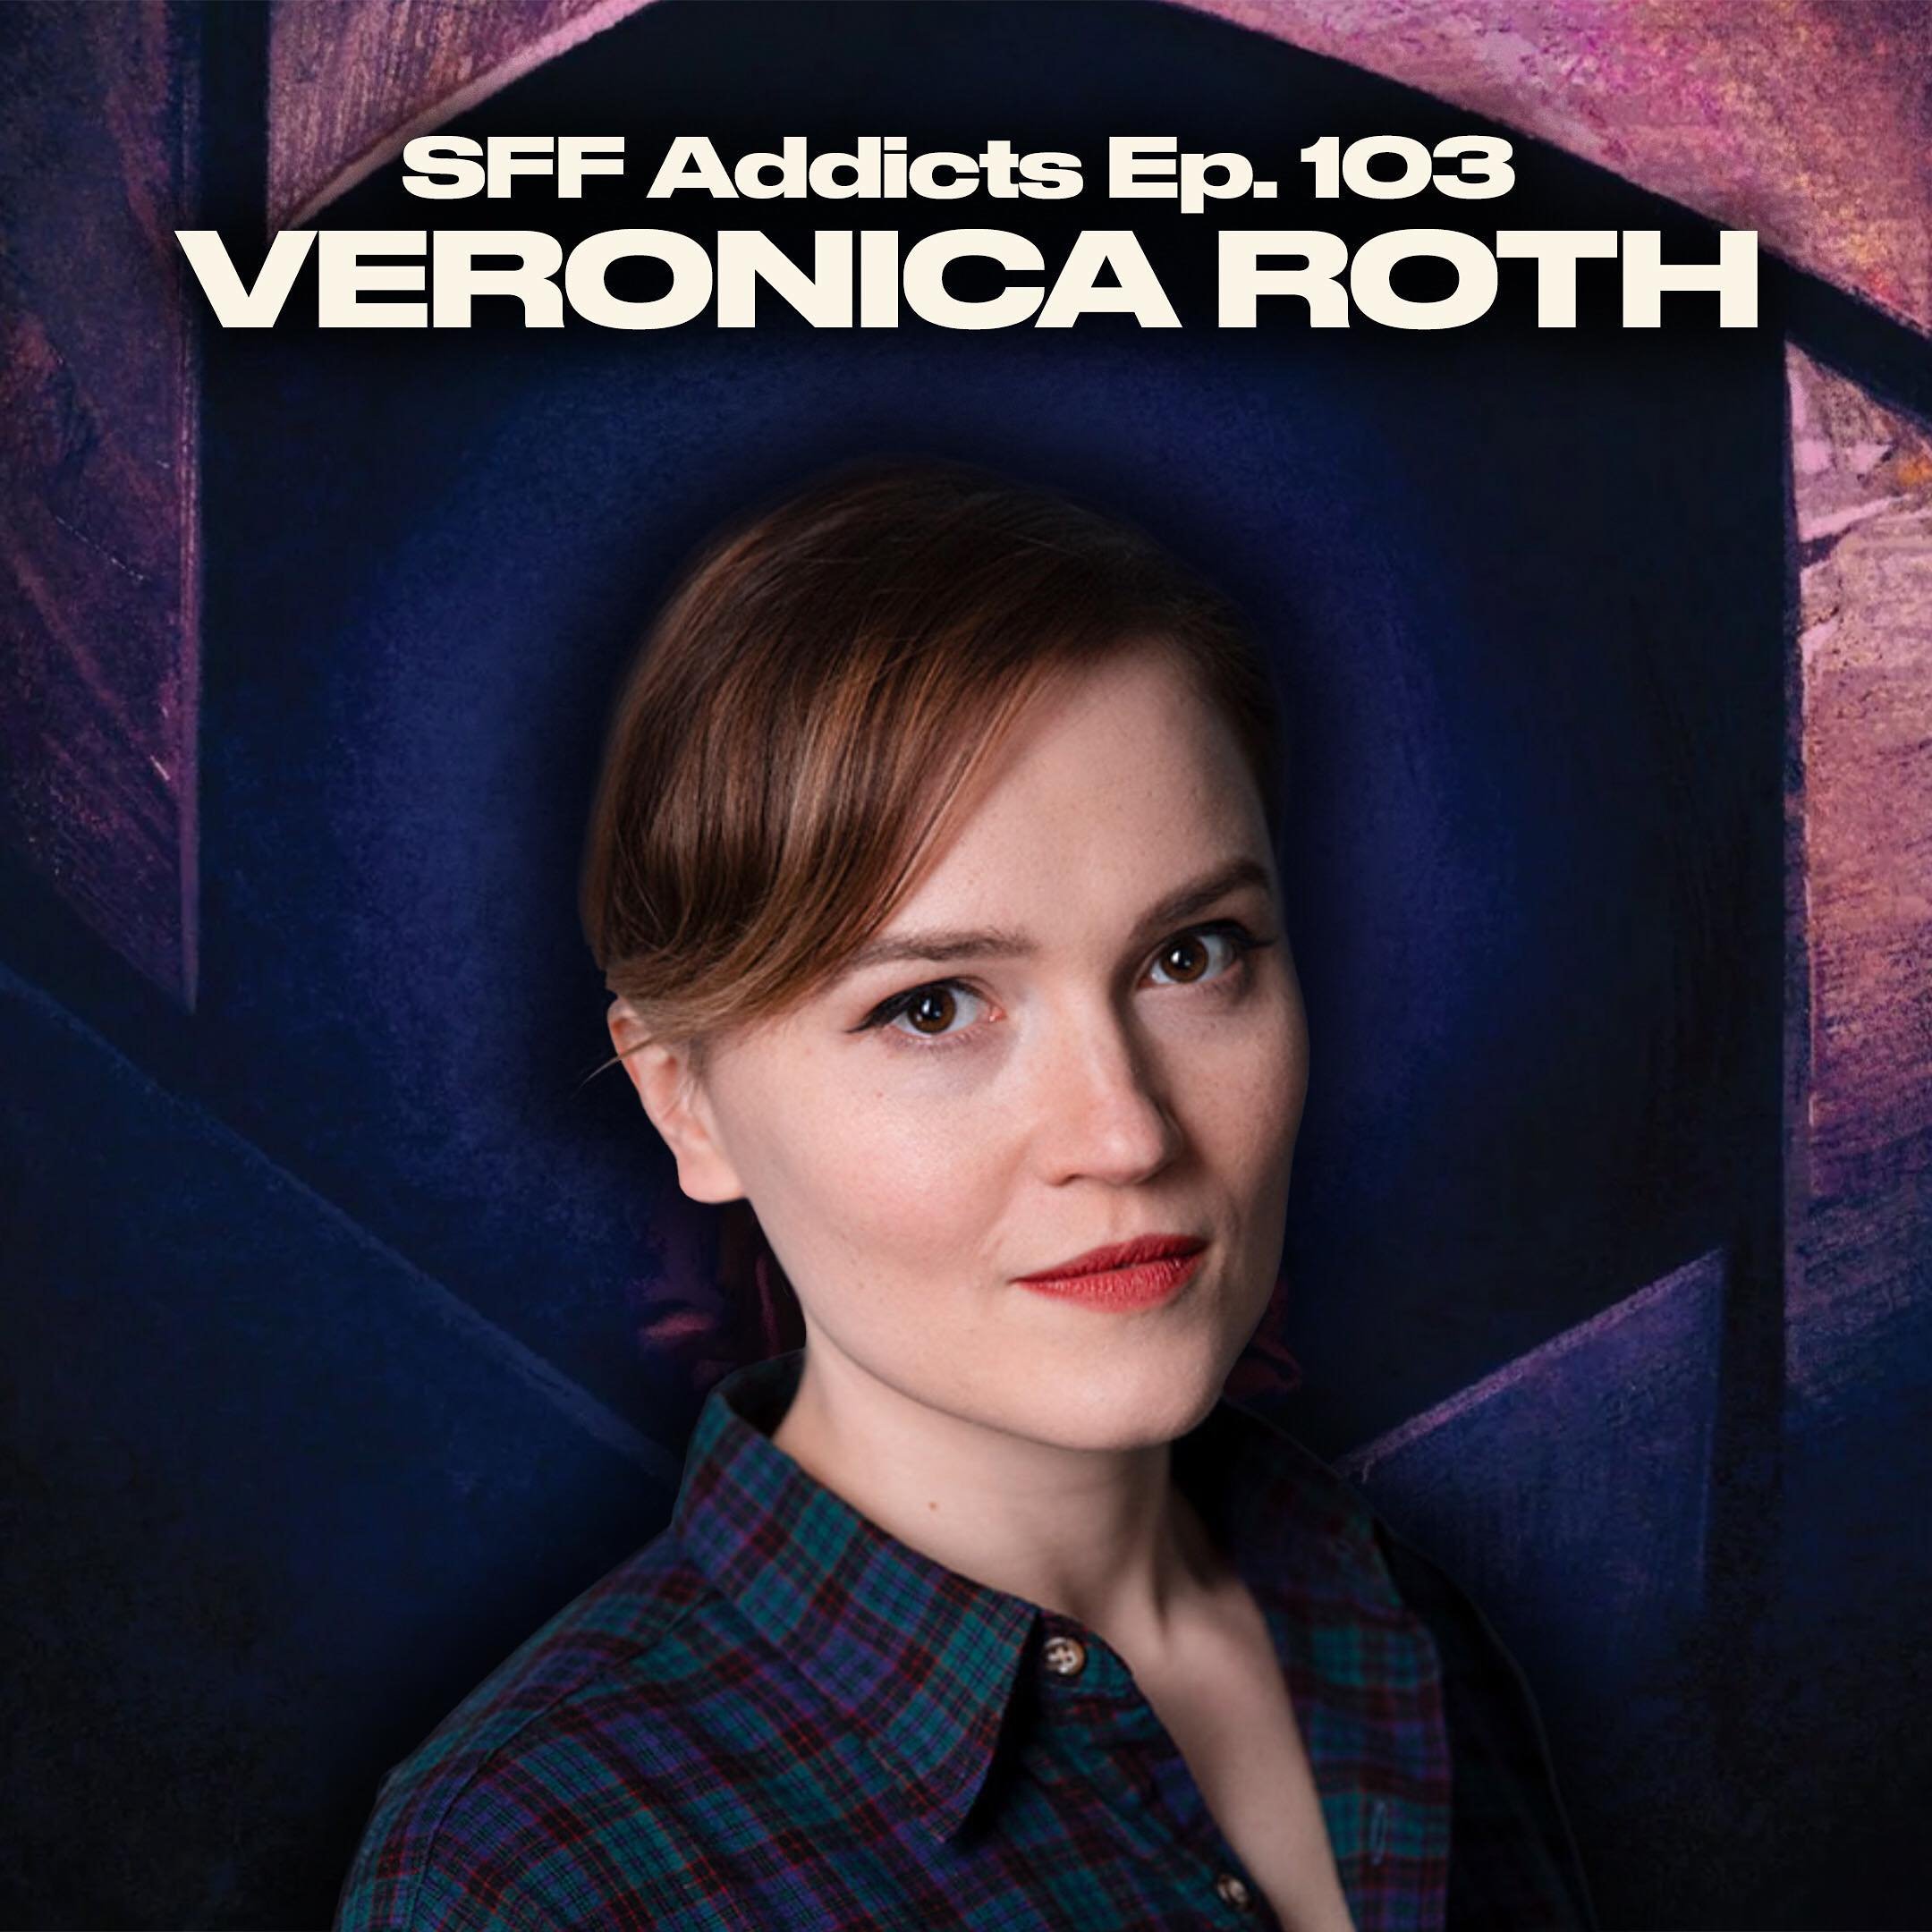 Ep. 103 of @sffaddictspod is LIVE! Join my co-host @mjkuhnbooks and I as we chat with bestselling author @veronicaroth about her new novella When Among Crows, managing success, worldbuilding, adult vs. YA, publishing trends and more.

And don&rsquo;t